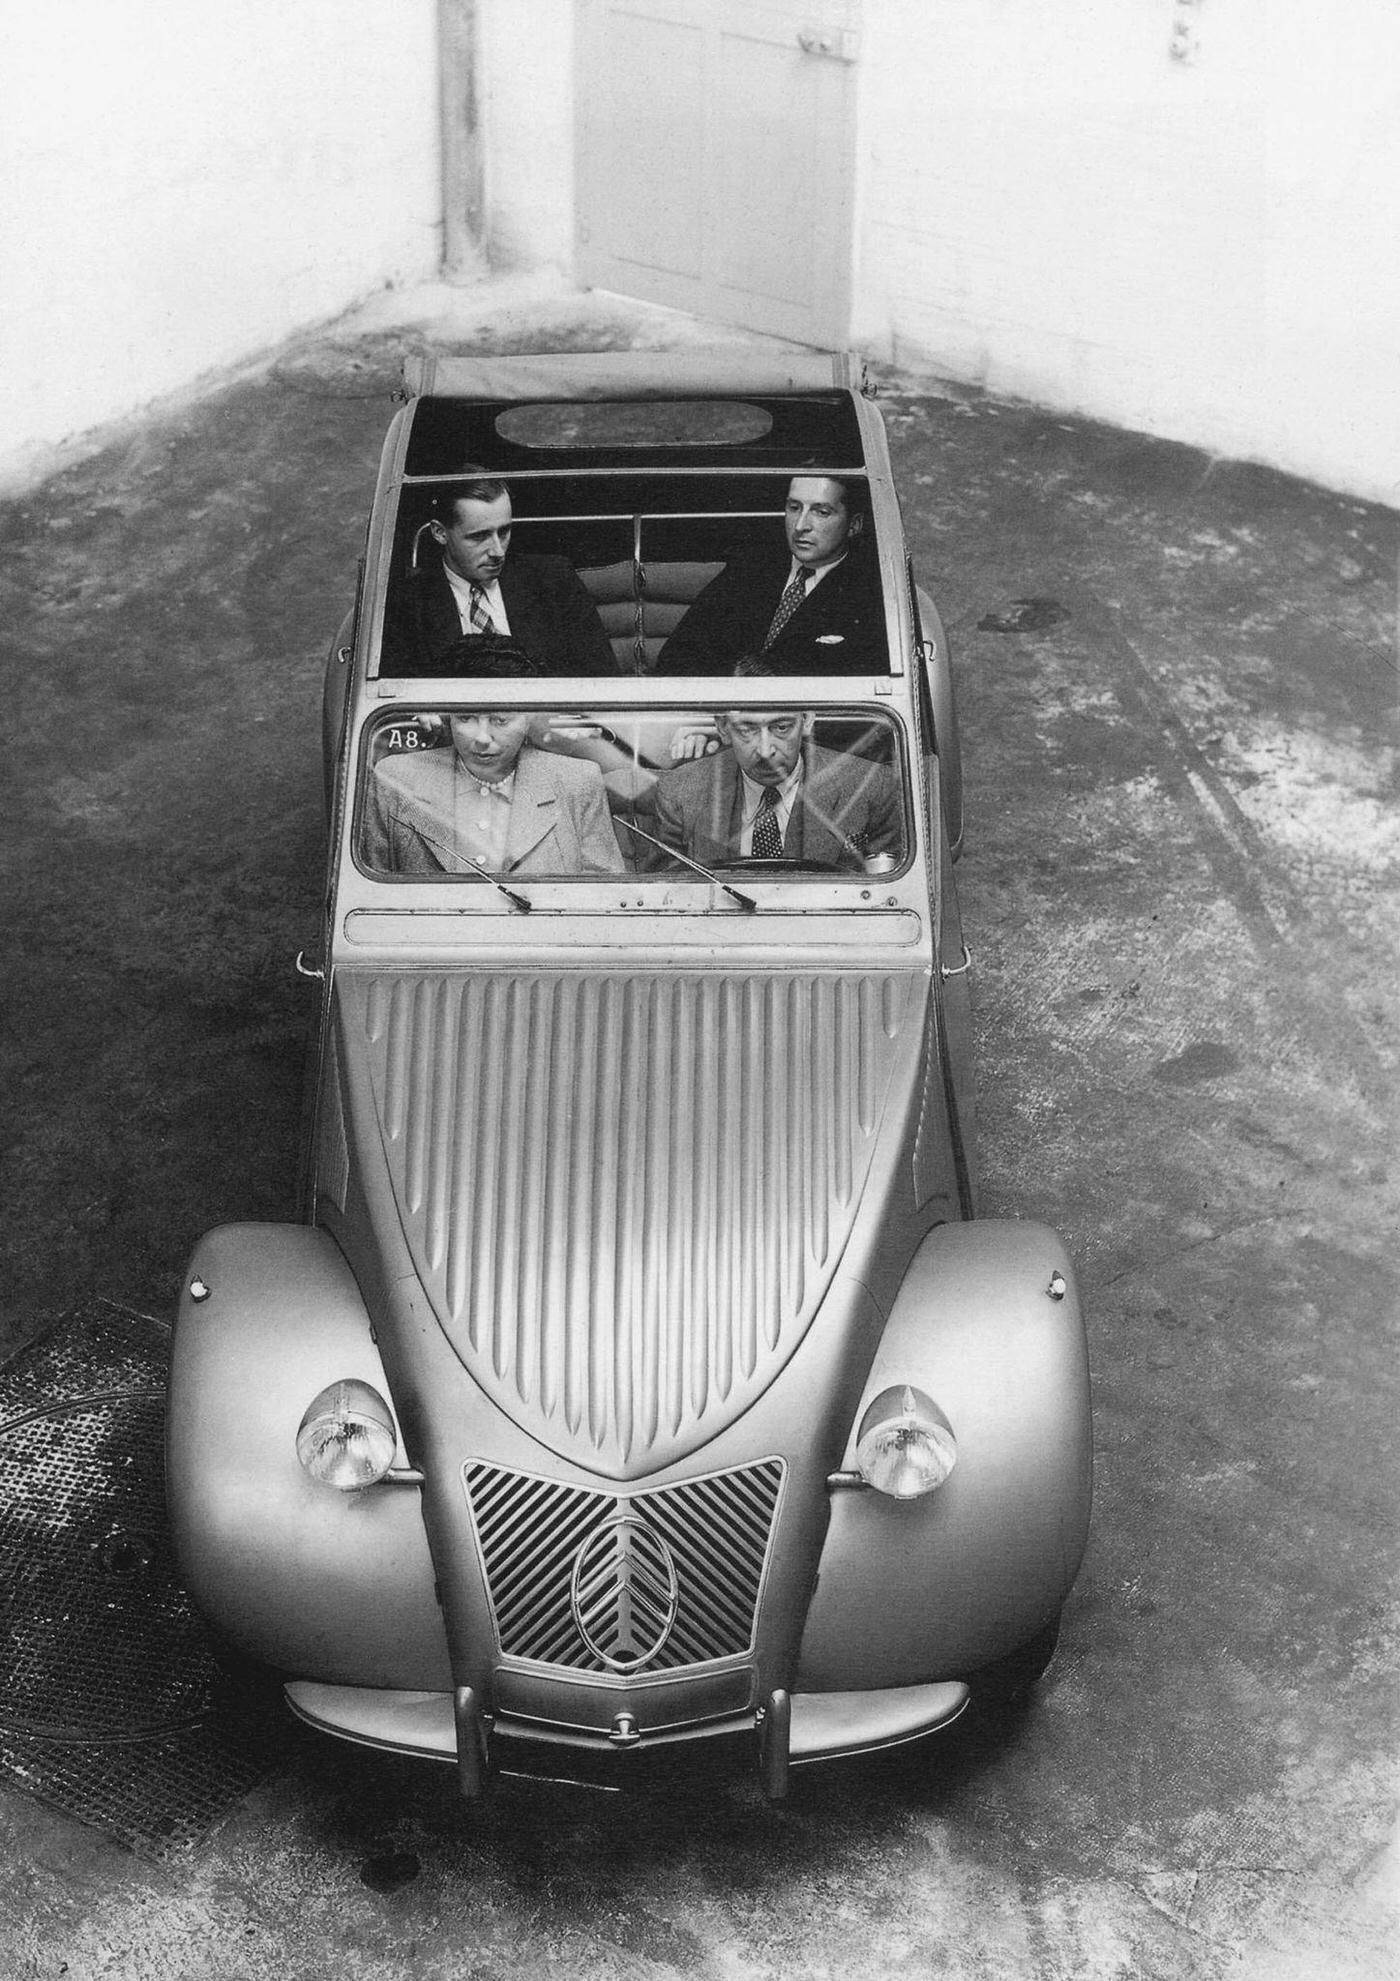 The 2CV Citroen Car Tested by Leader of Research Department, his Secretary and 2 Engineers, 1948.